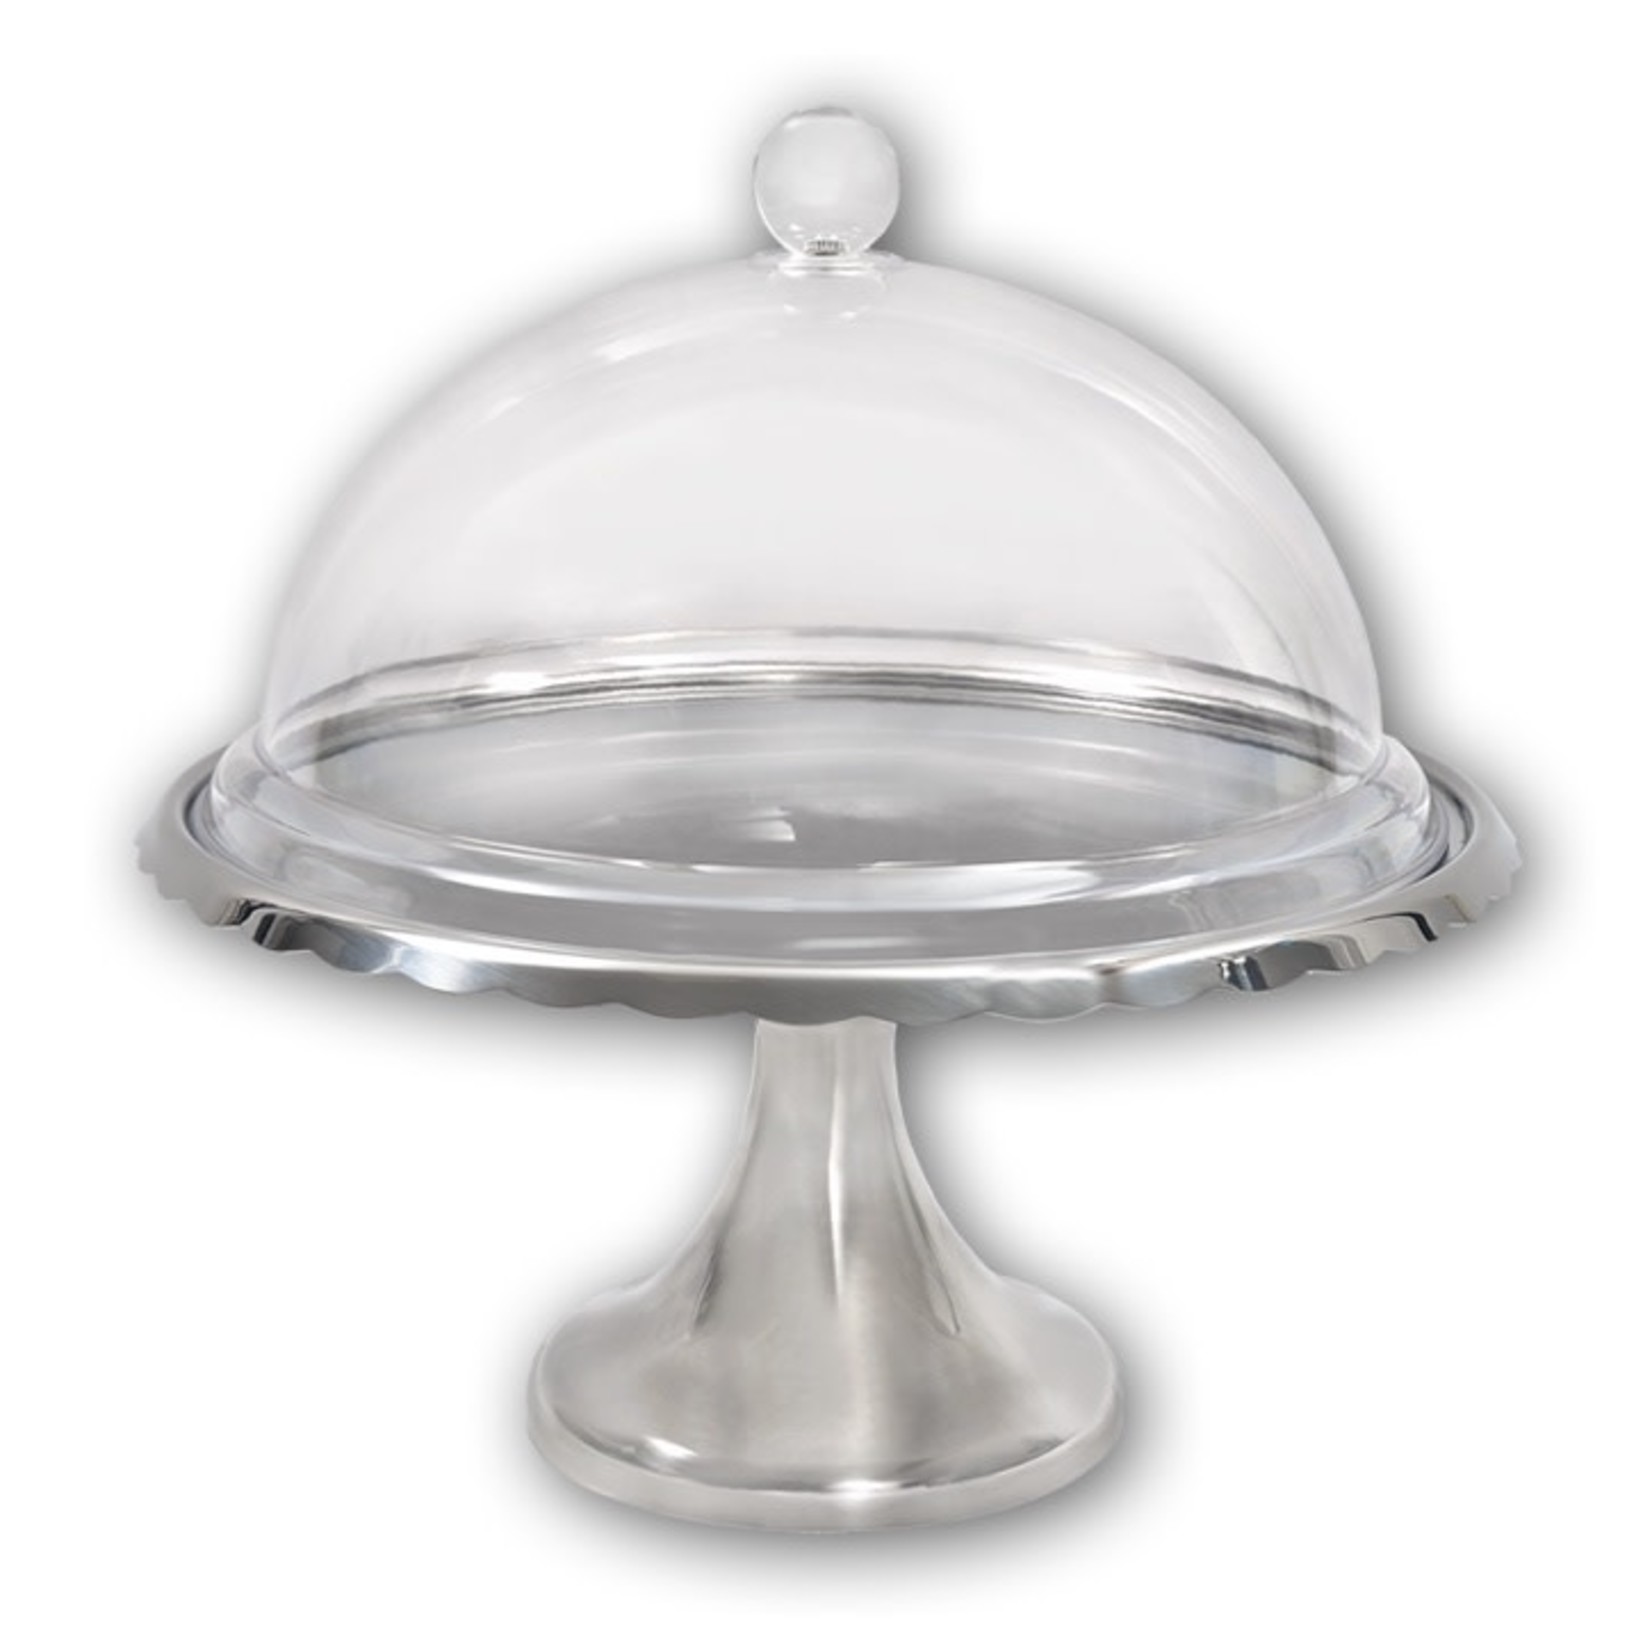 SARA DOLCE SARA DOLCE Cake Stand with Cover 10" - Stainless